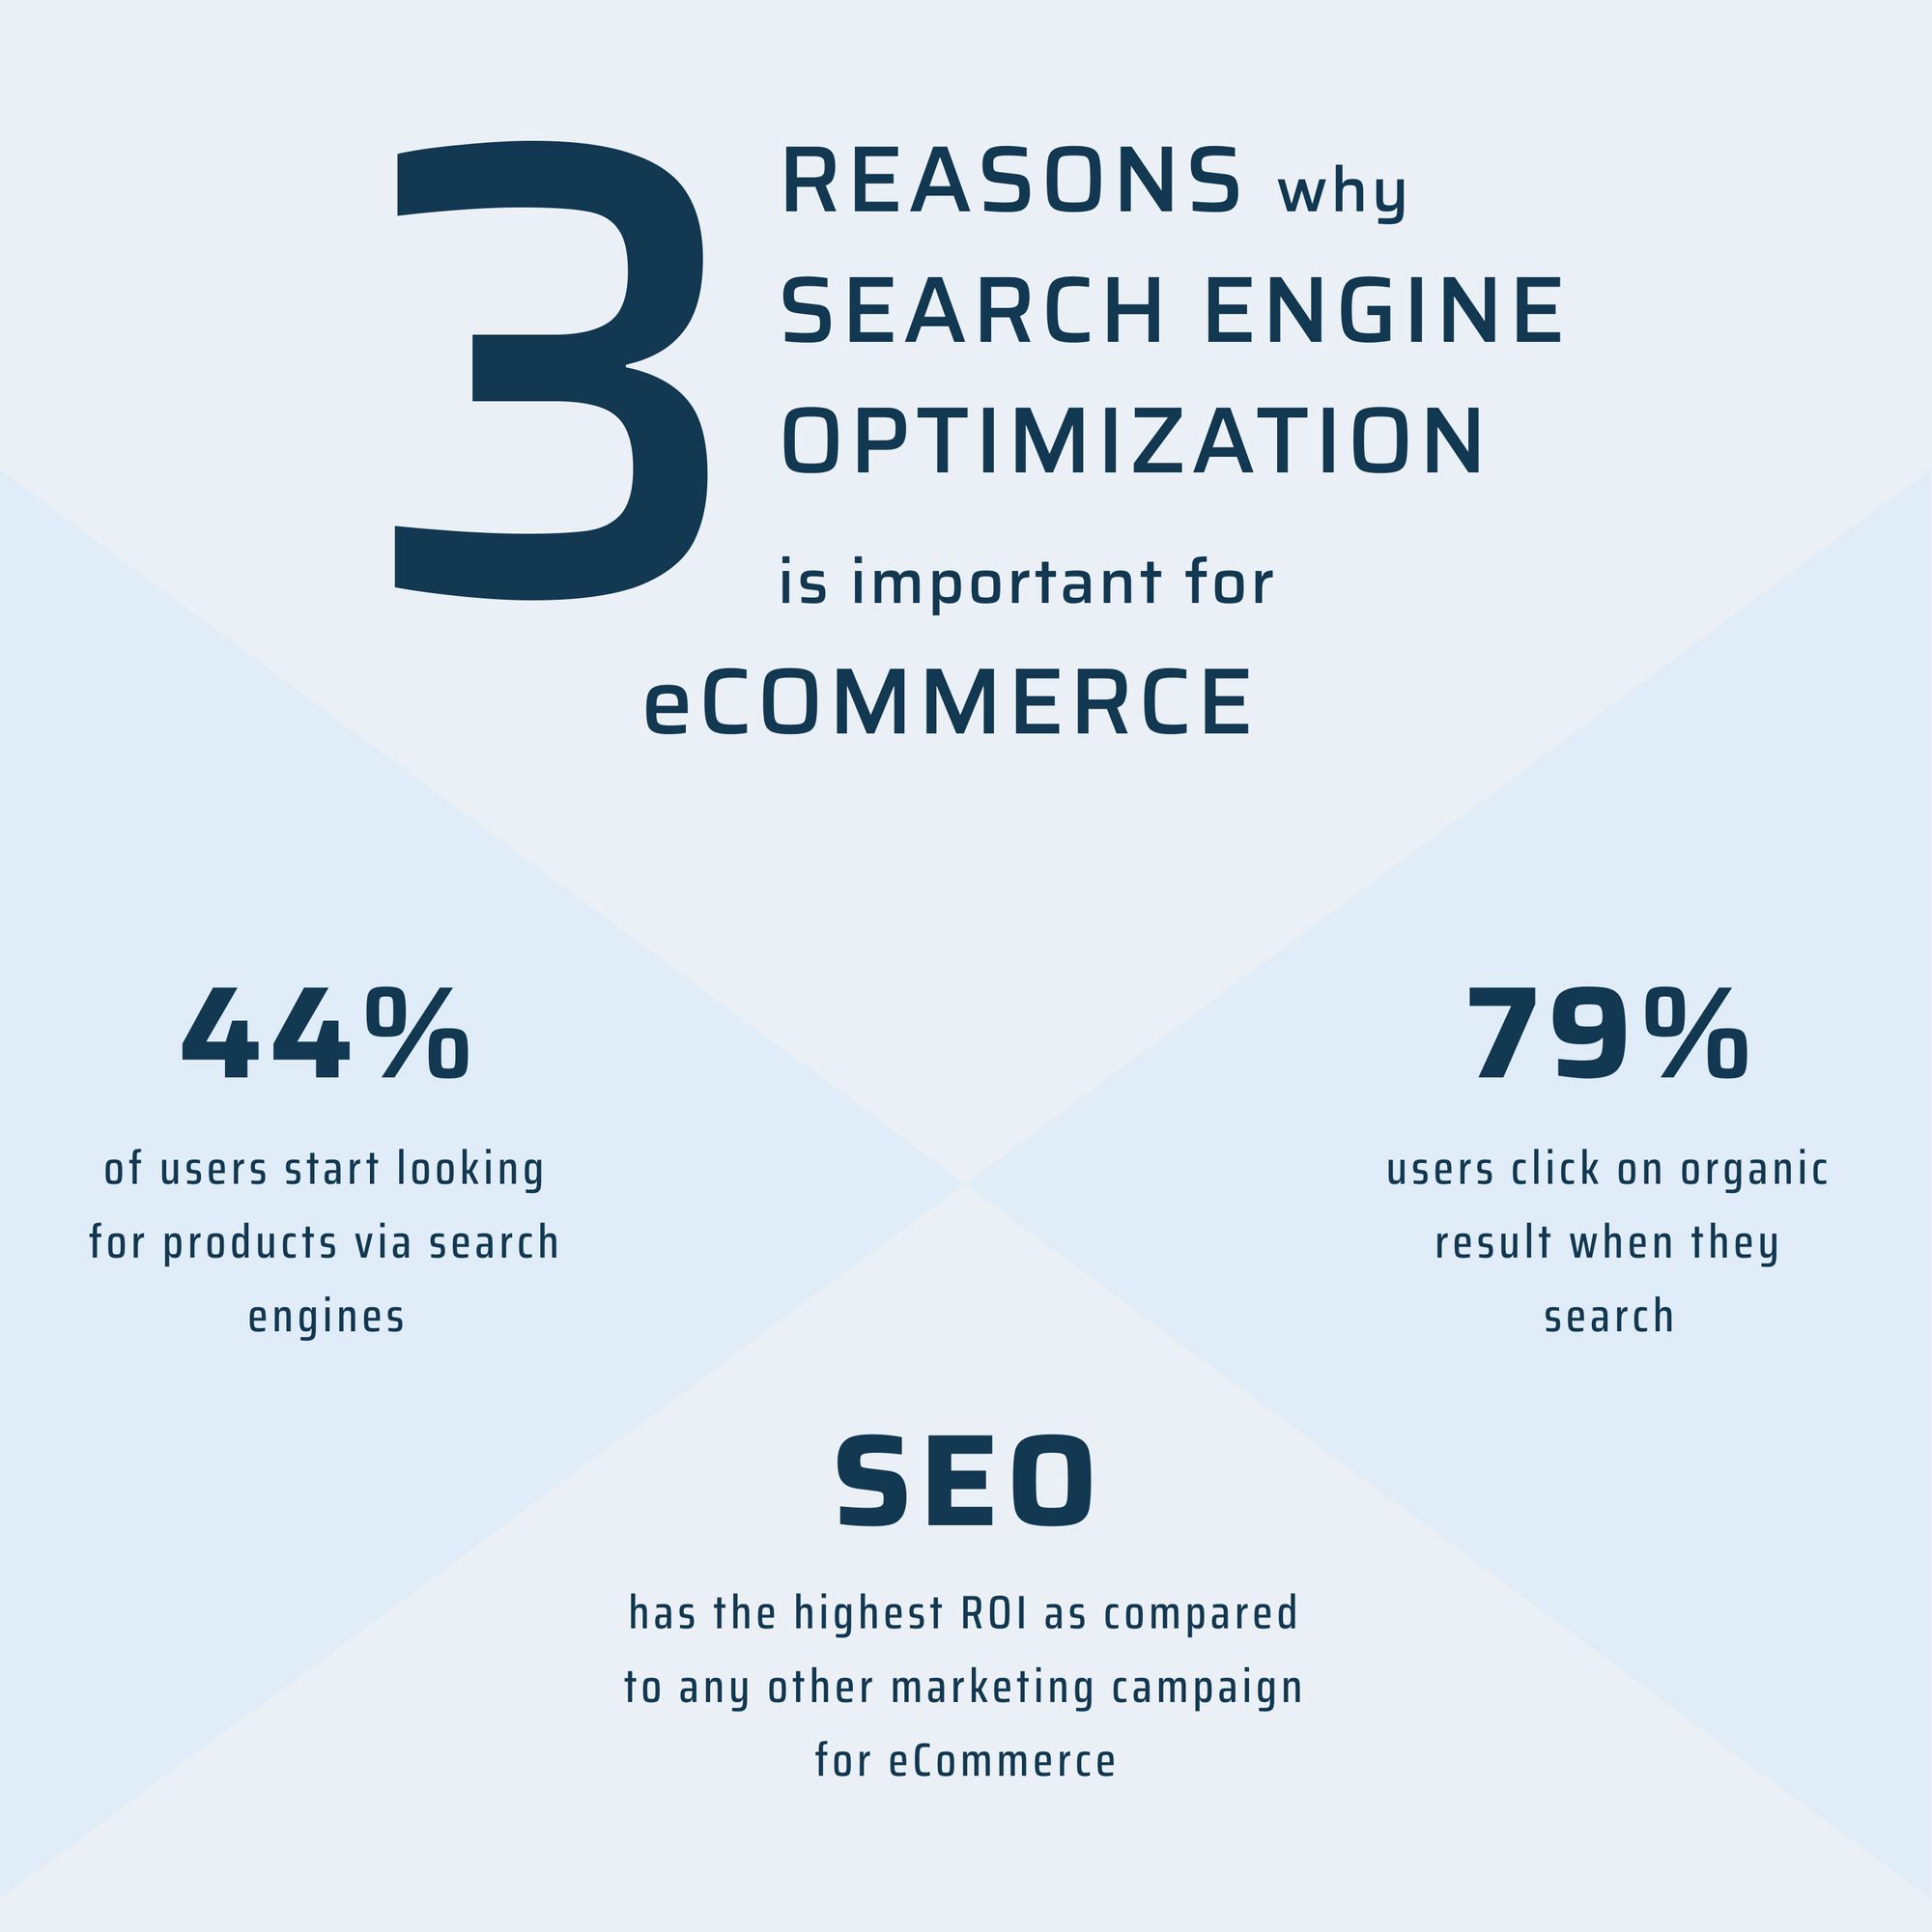 Reasons why SEO is important for eCommerce